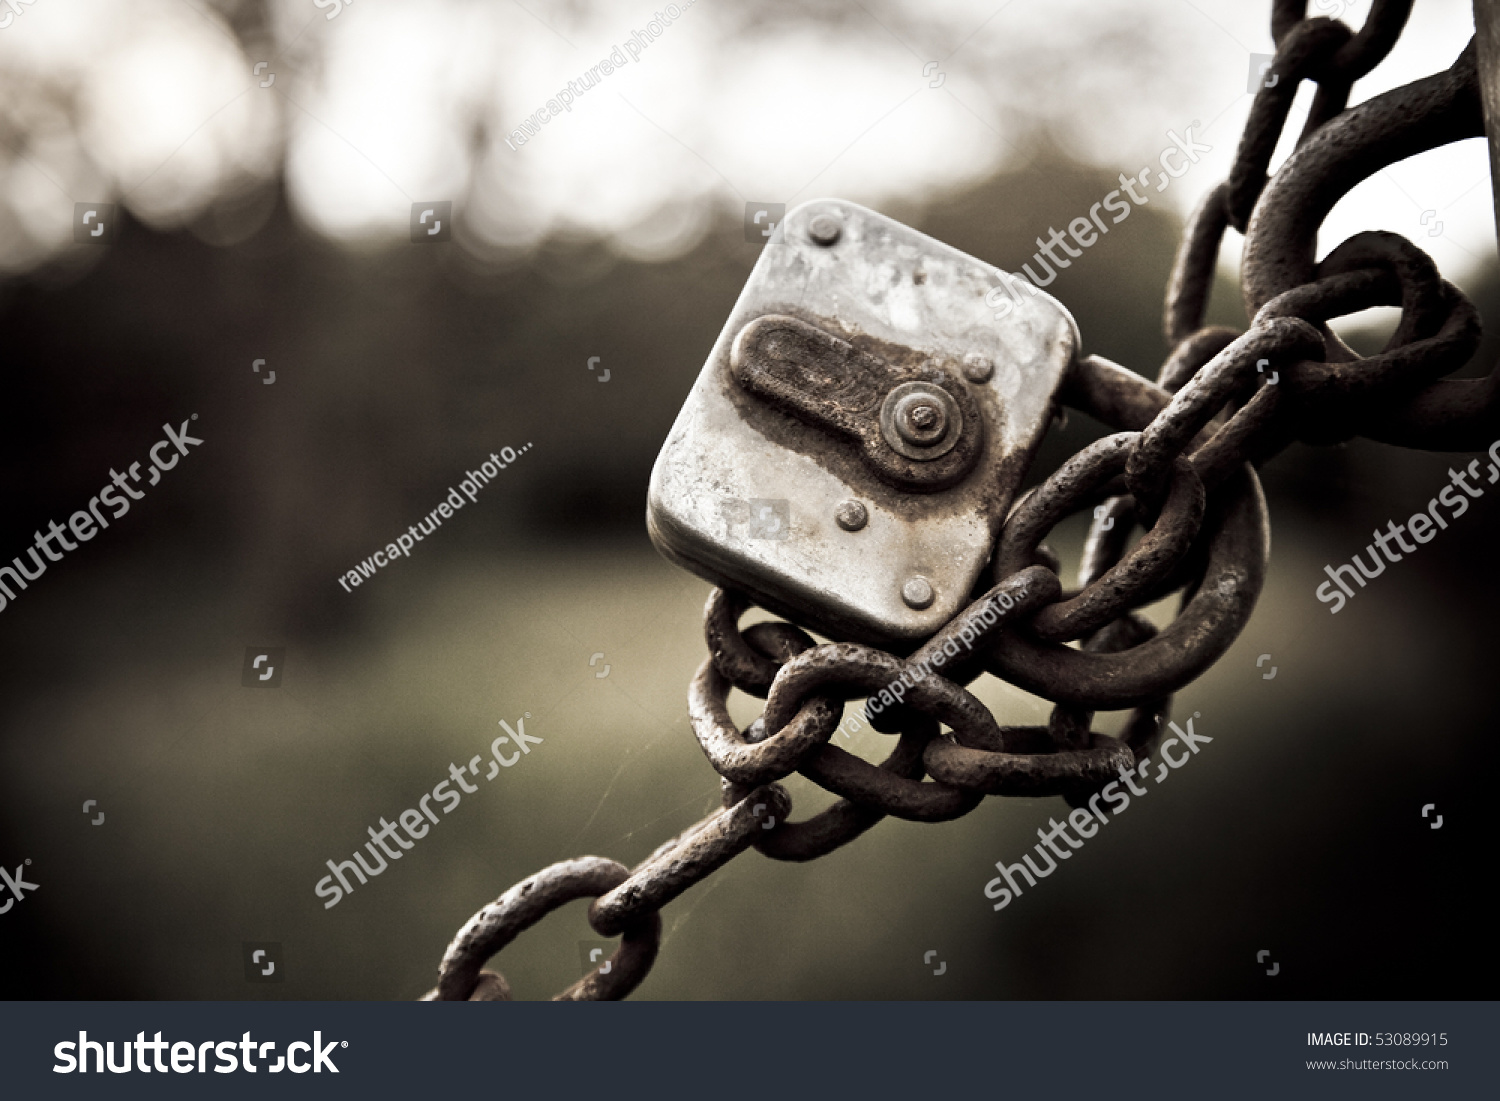 Rusted Lock With Chain Stock Photo 53089915 : Shutterstock